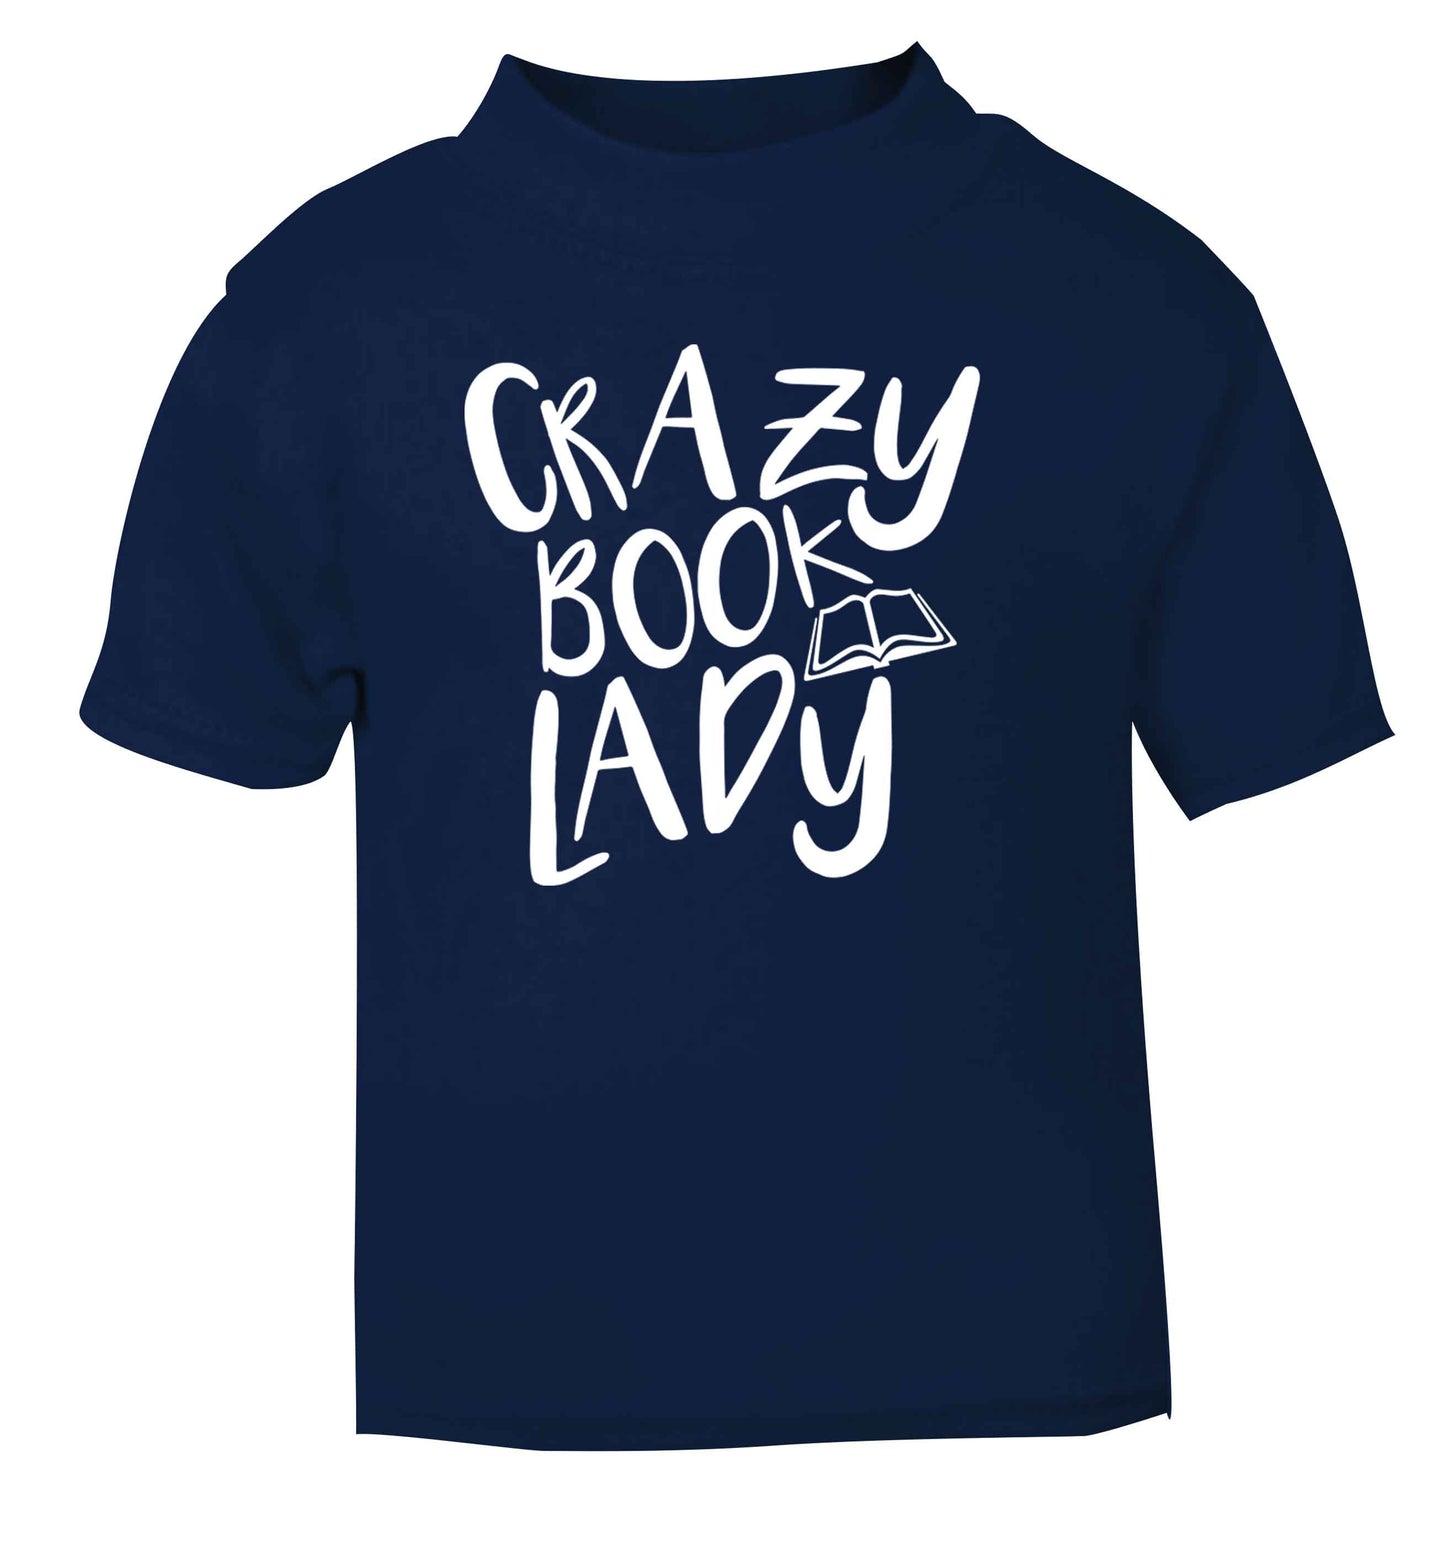 Crazy book lady navy Baby Toddler Tshirt 2 Years